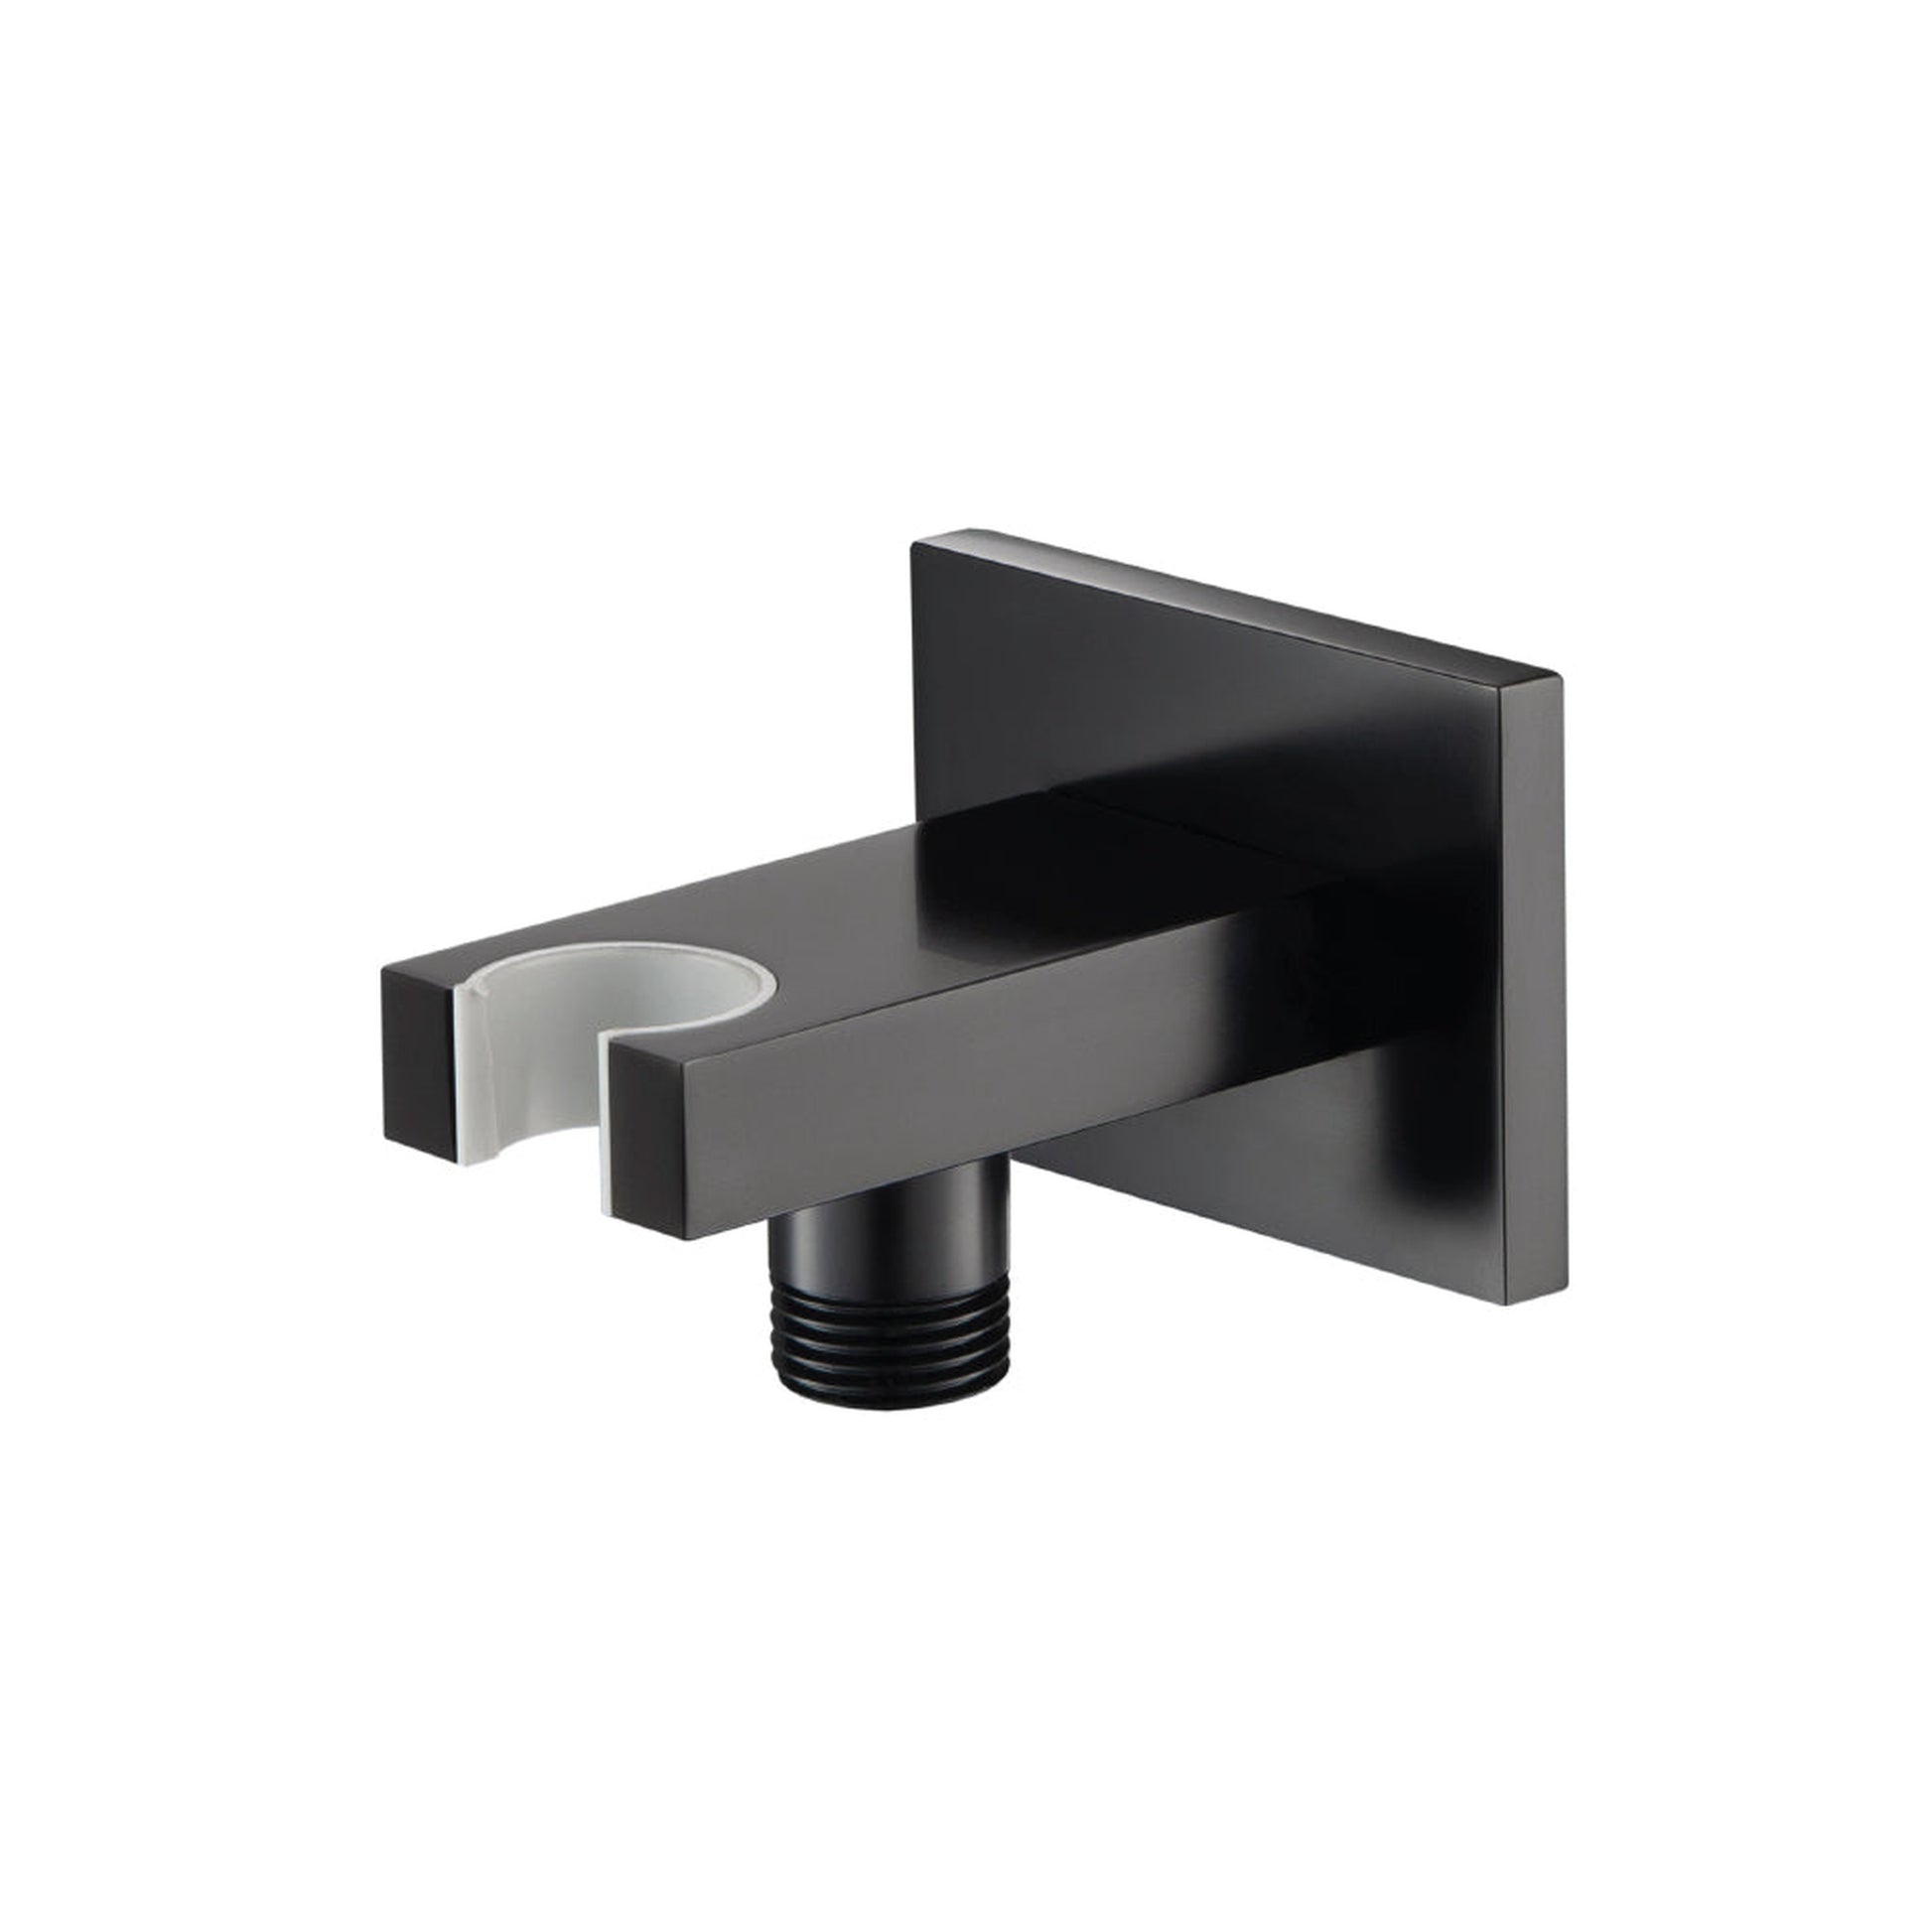 Isenberg Universal Fixtures Wall Elbow With Combo Holder in Matte Black (HS8006MB)